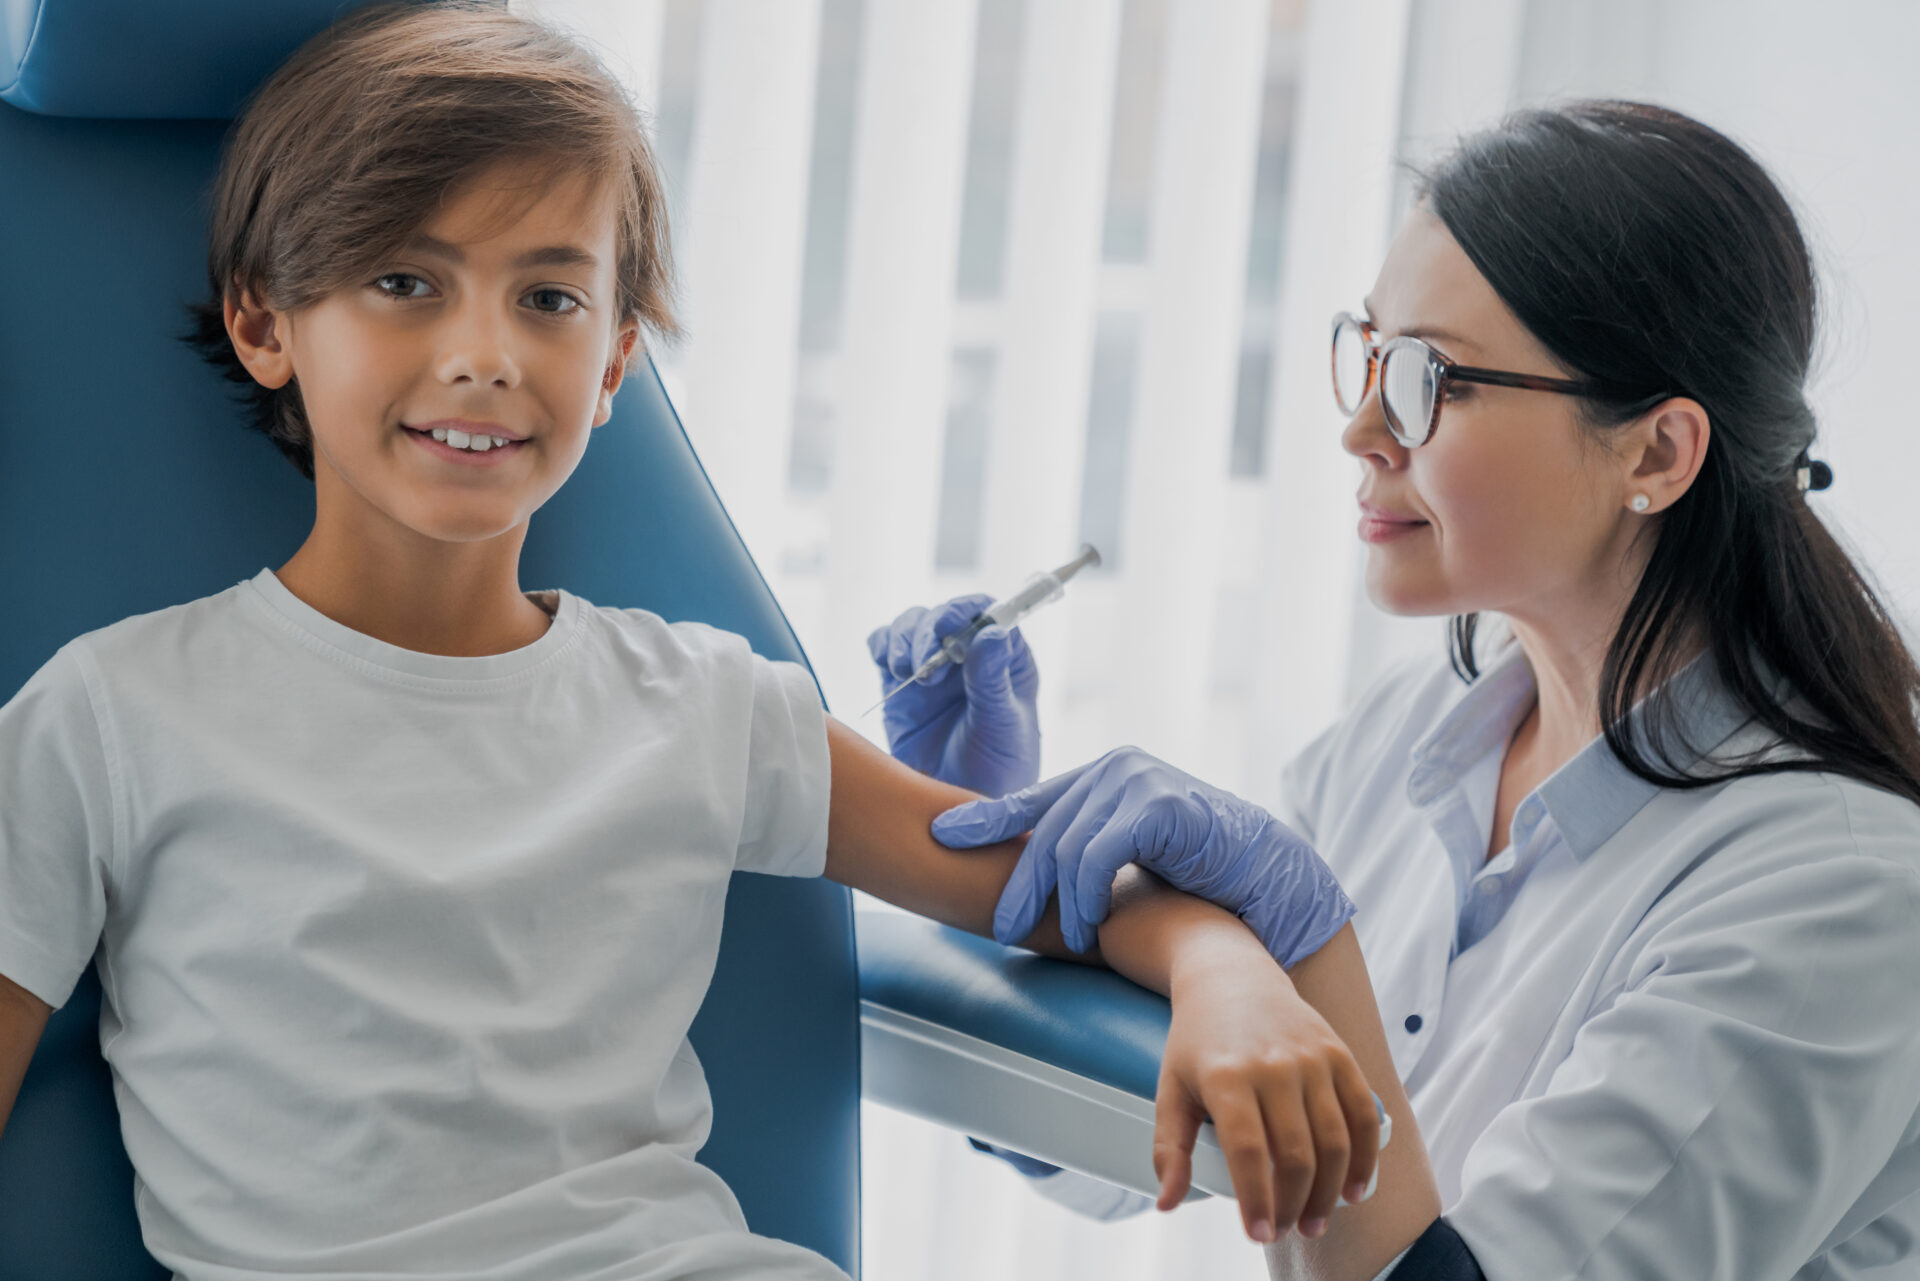 Older child getting a vaccine